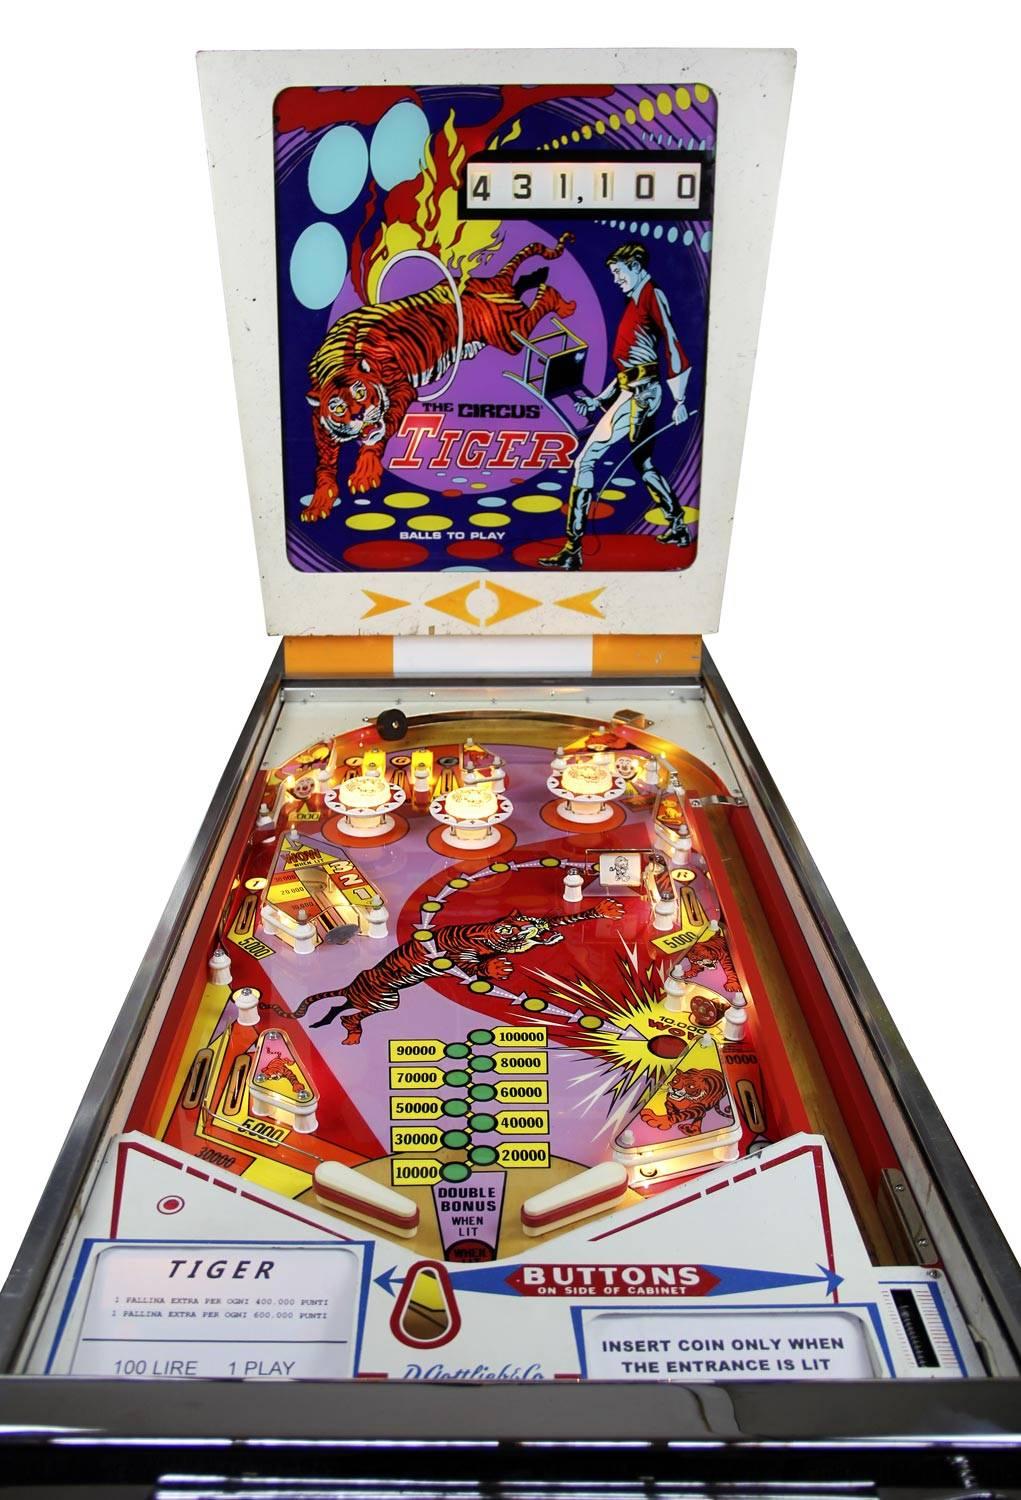 The Cirqus Tiger
Name: The Circus Tiger
Make: Unknown but based on Gottlieb “Tiger”
Date of build: 1975/6
Designer: Ed Krynski
Artwork: Gordon Morison
Number made: Unknown
Origin: Naples
Features: This game is not only rare, no one actually